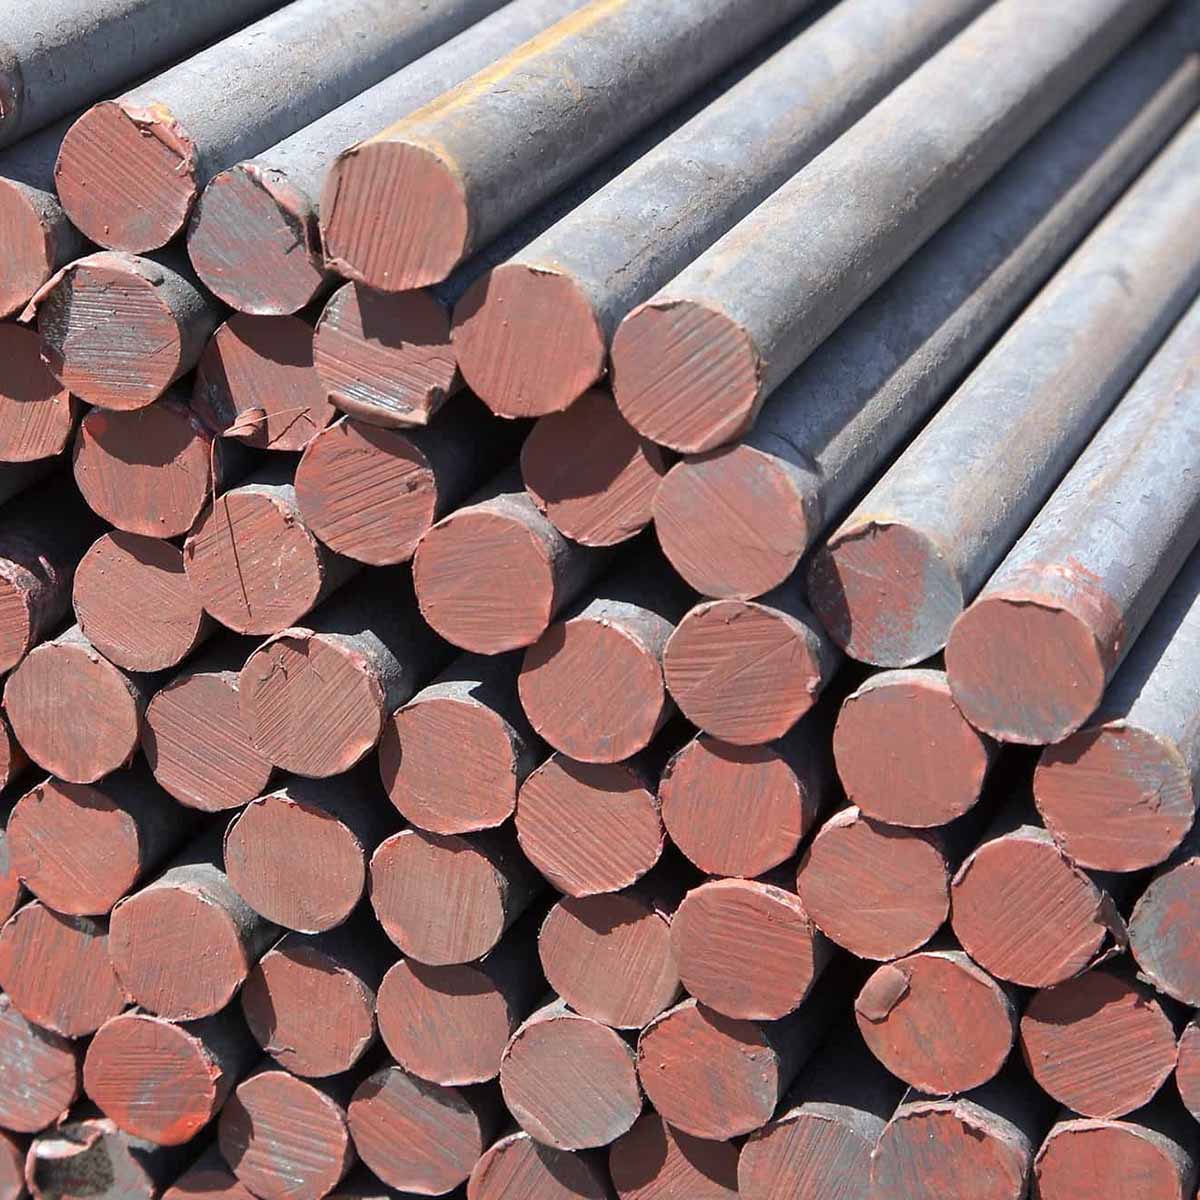 SAE 4150 Alloy Steel Round Bar Suppliers in Mumbai India